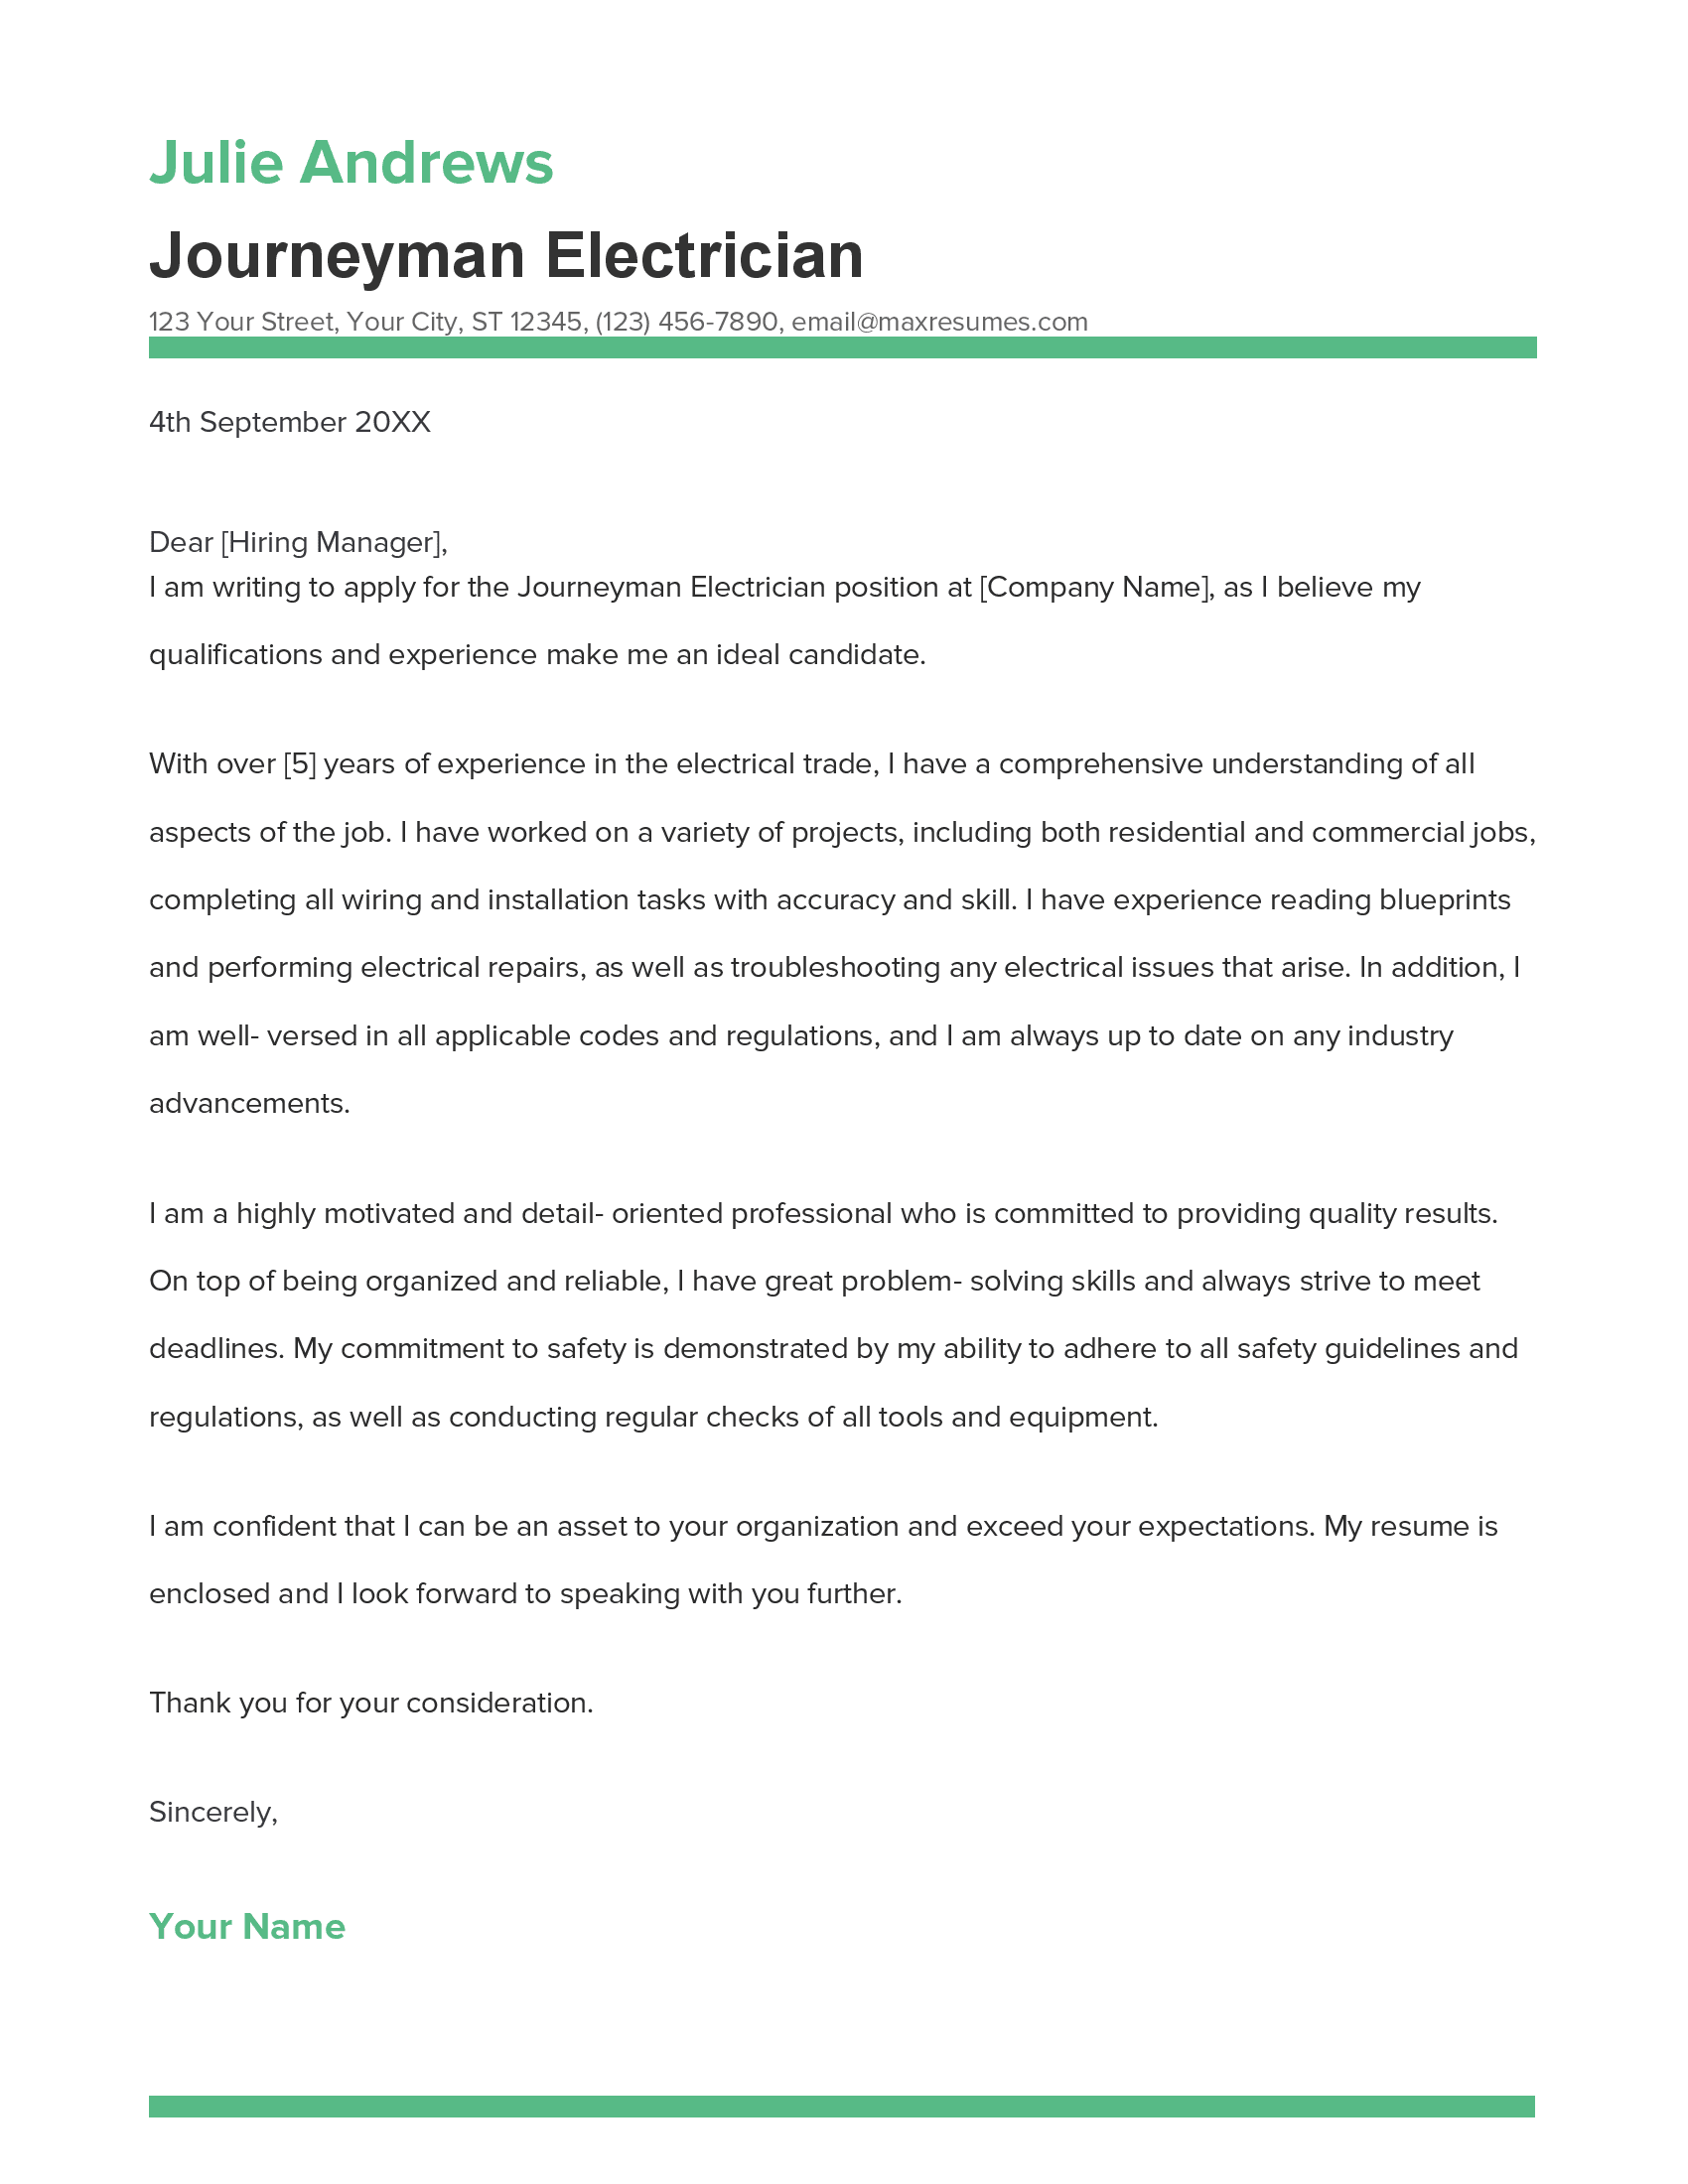 journeyman electrician cover letter